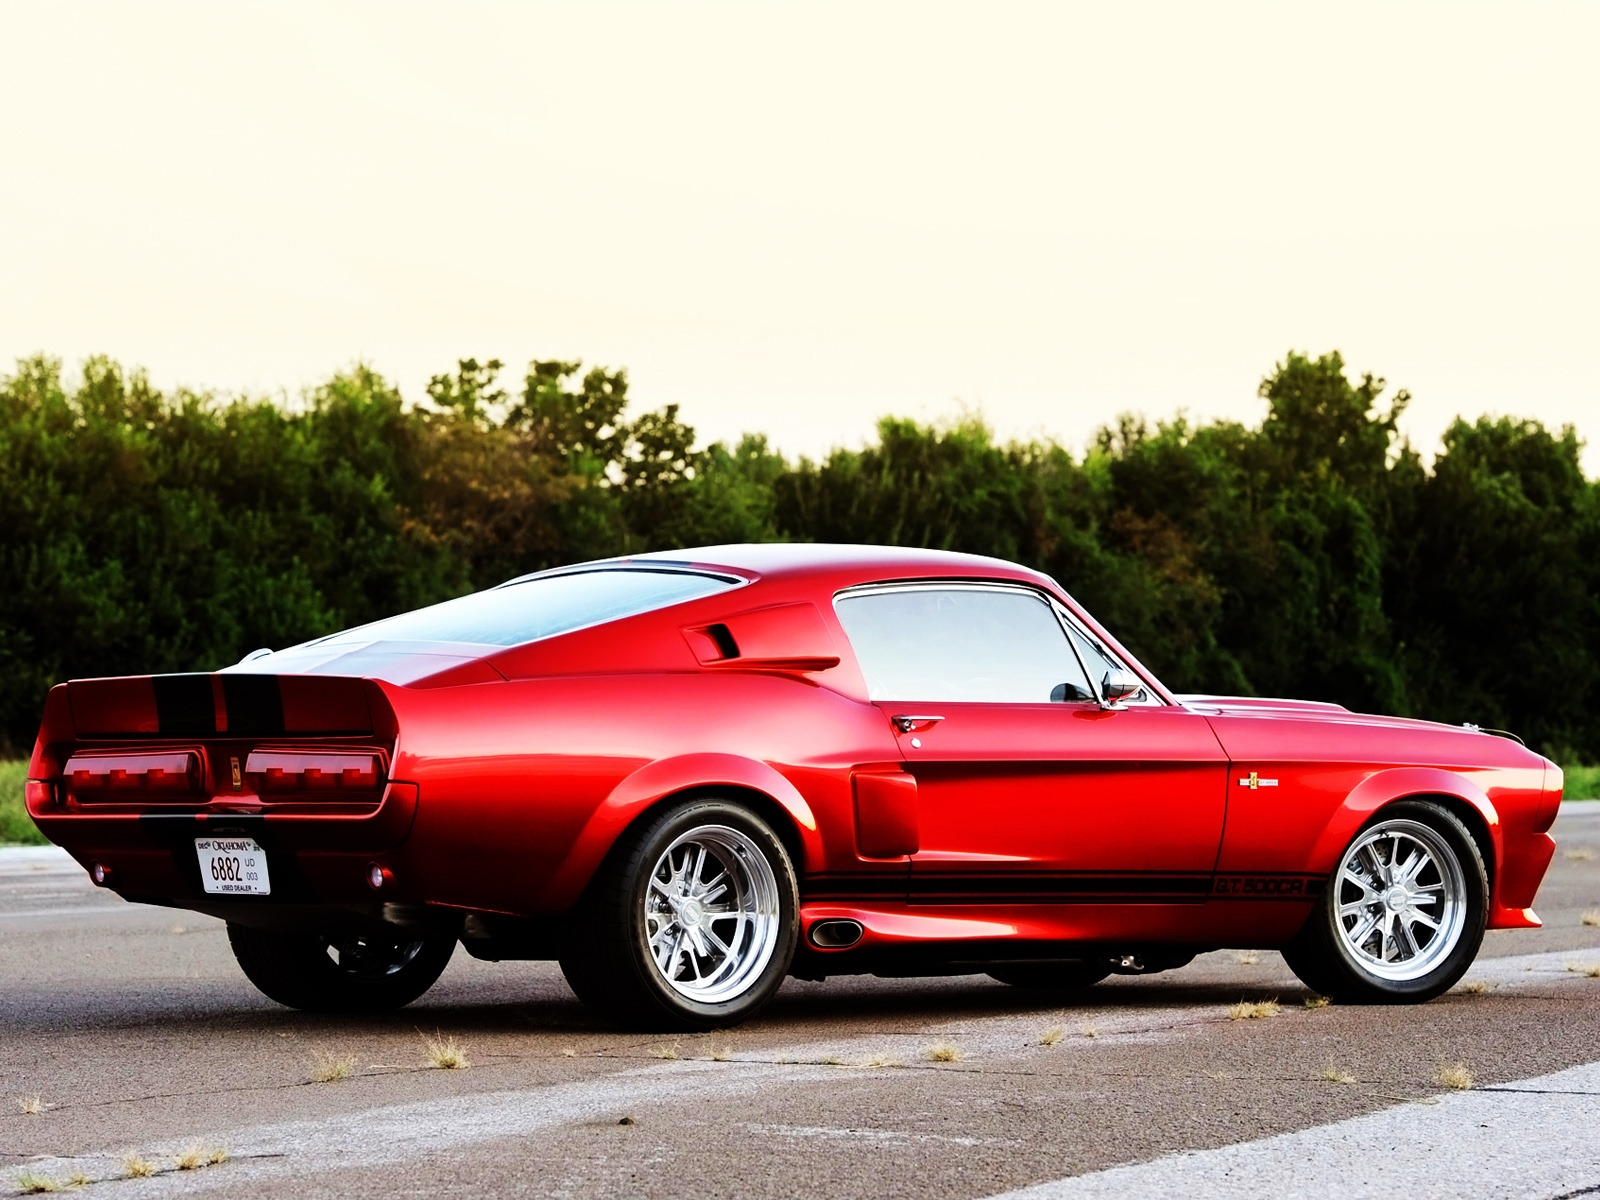 2011 Shelby GT500CR Rear for 1600 x 1200 resolution